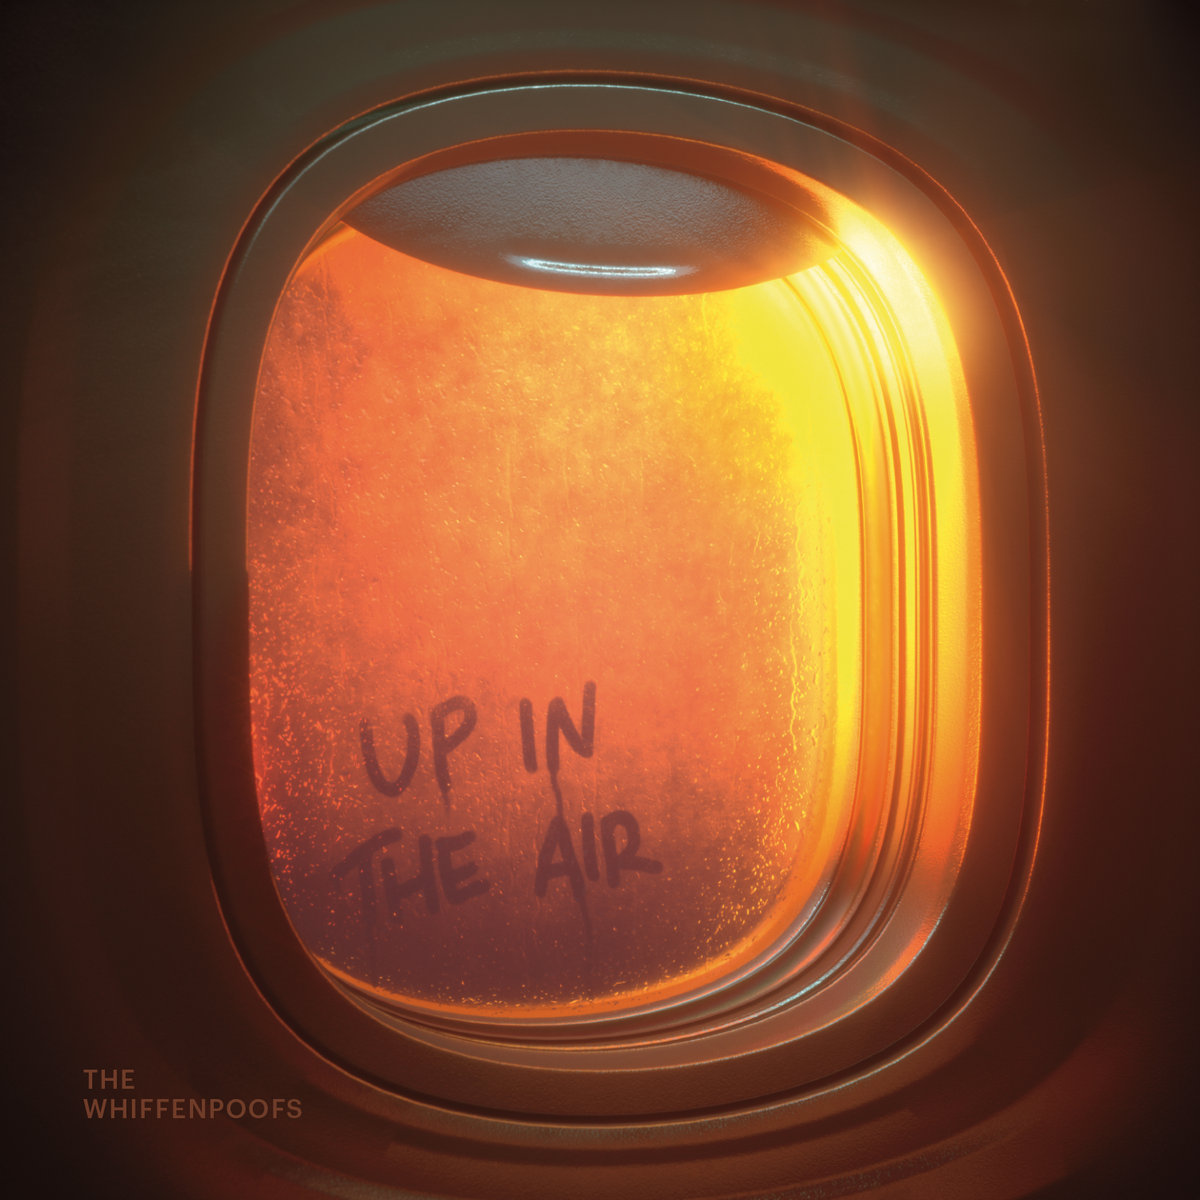 Up In the Air, 2018